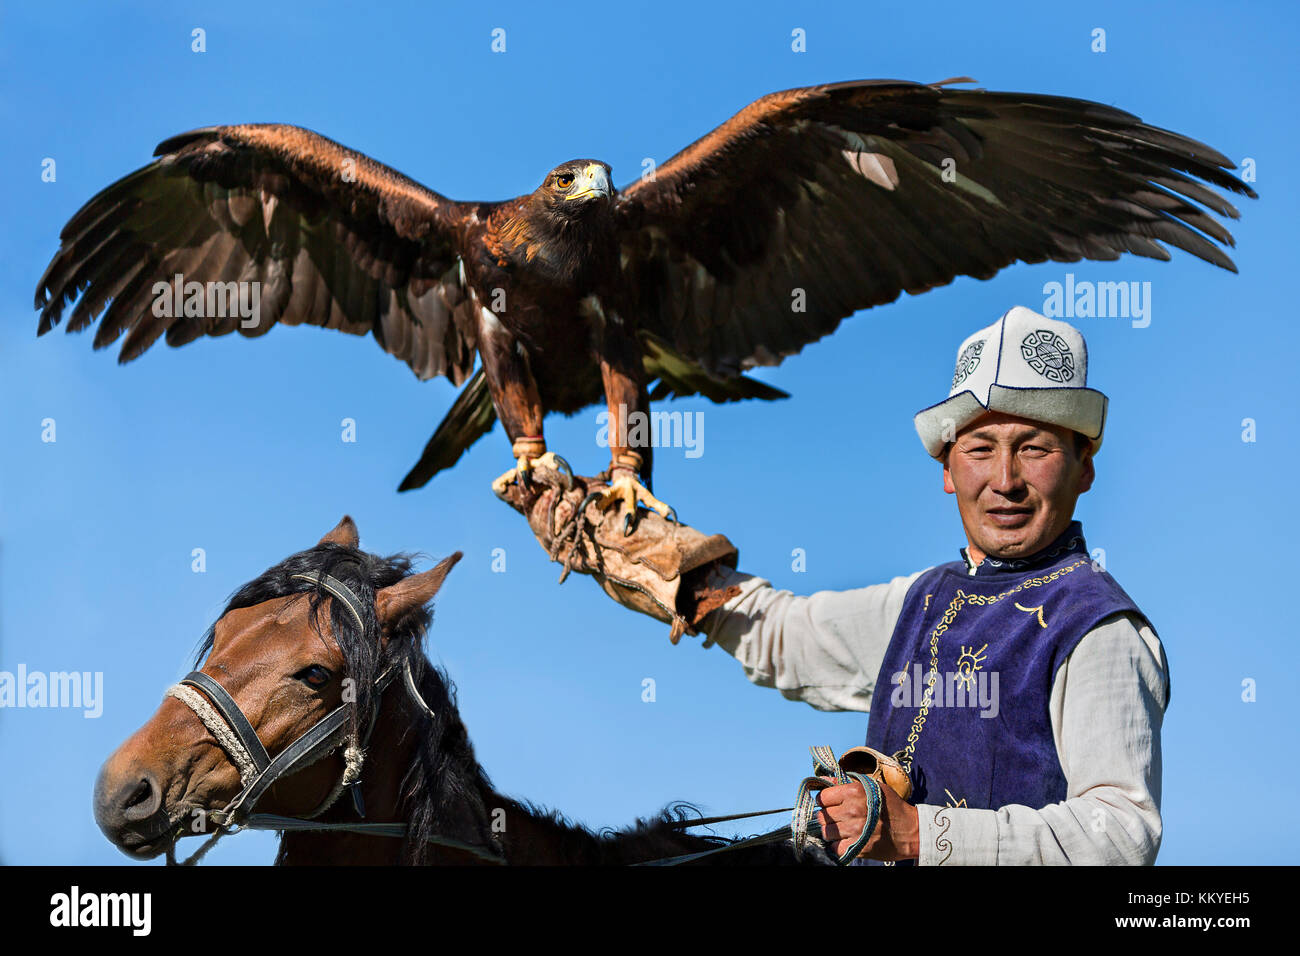 Golden eagle trainer holding his eagle during eagle hunter games in Issuk Kul Lake, Kyrgyzstan. Stock Photo